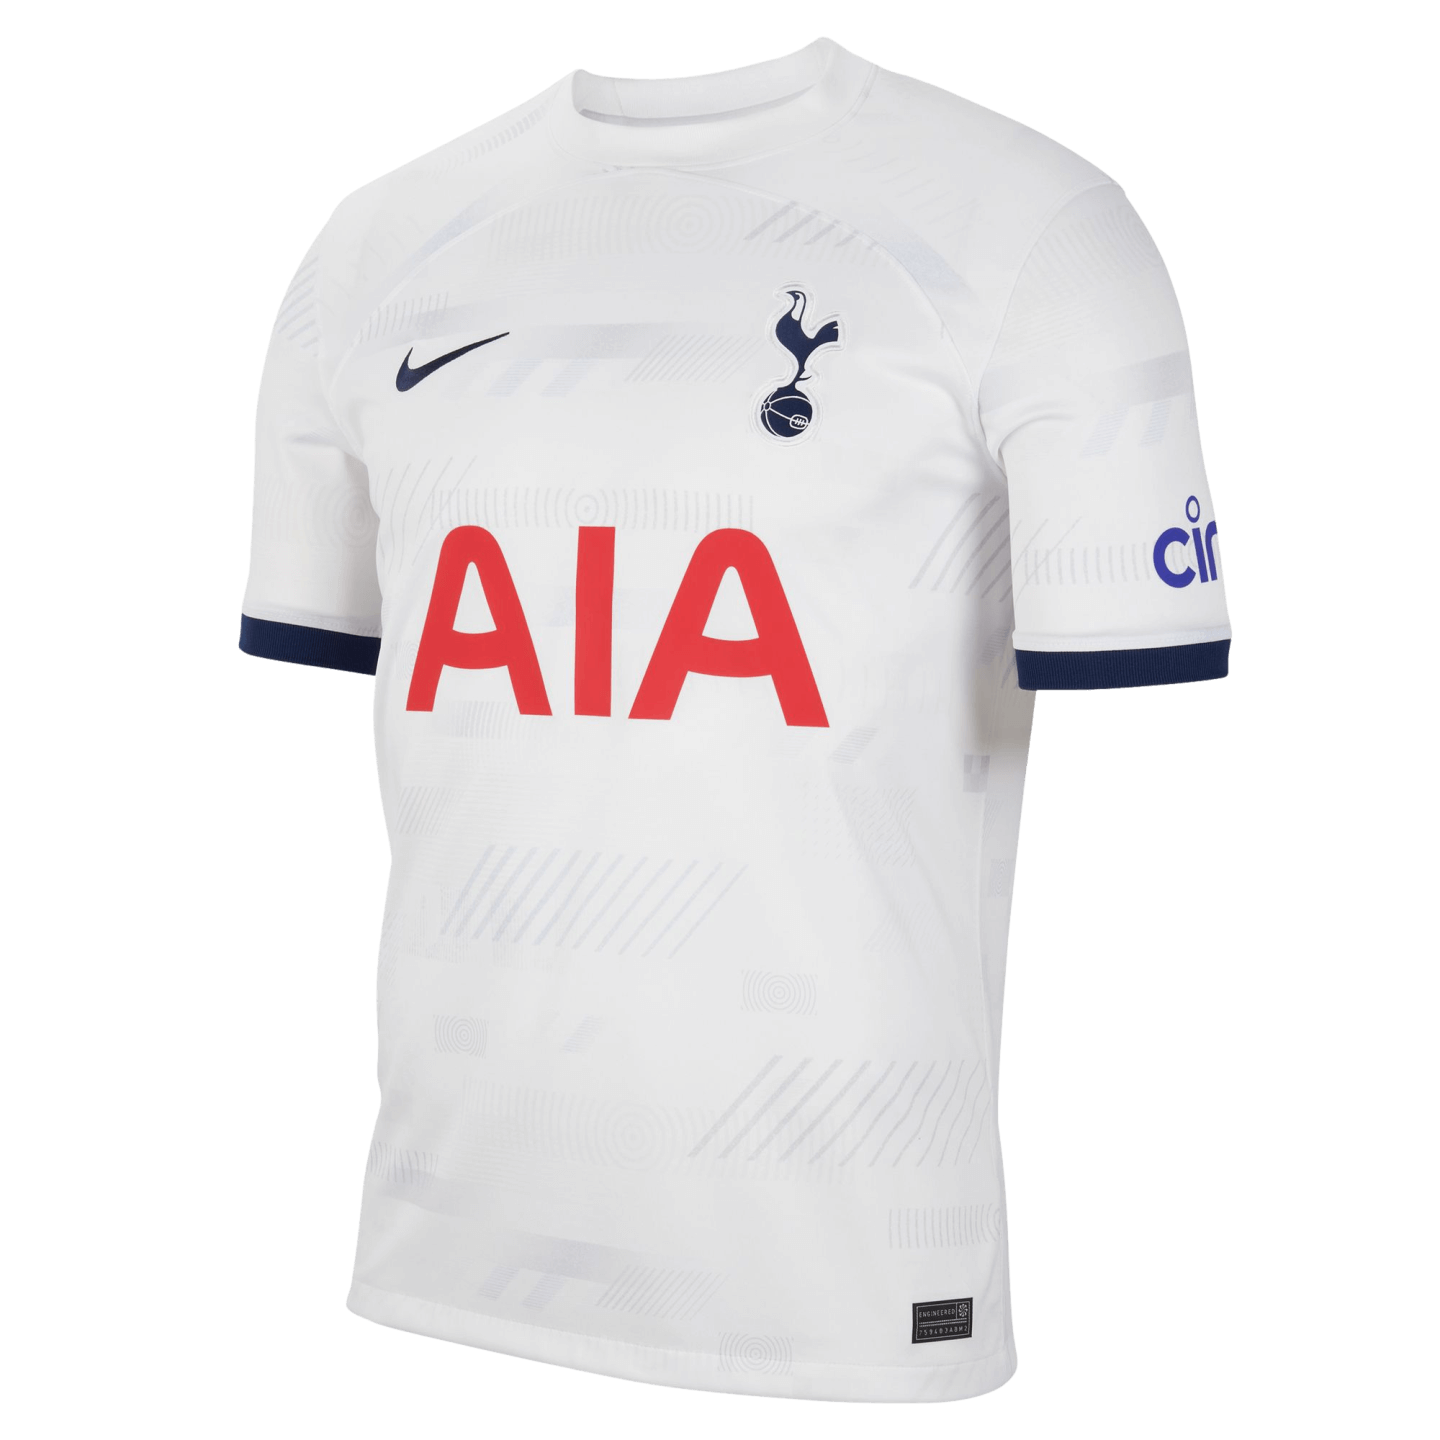 Request] 21/22 Spurs Home Kit with Blue Socks changed to White : r